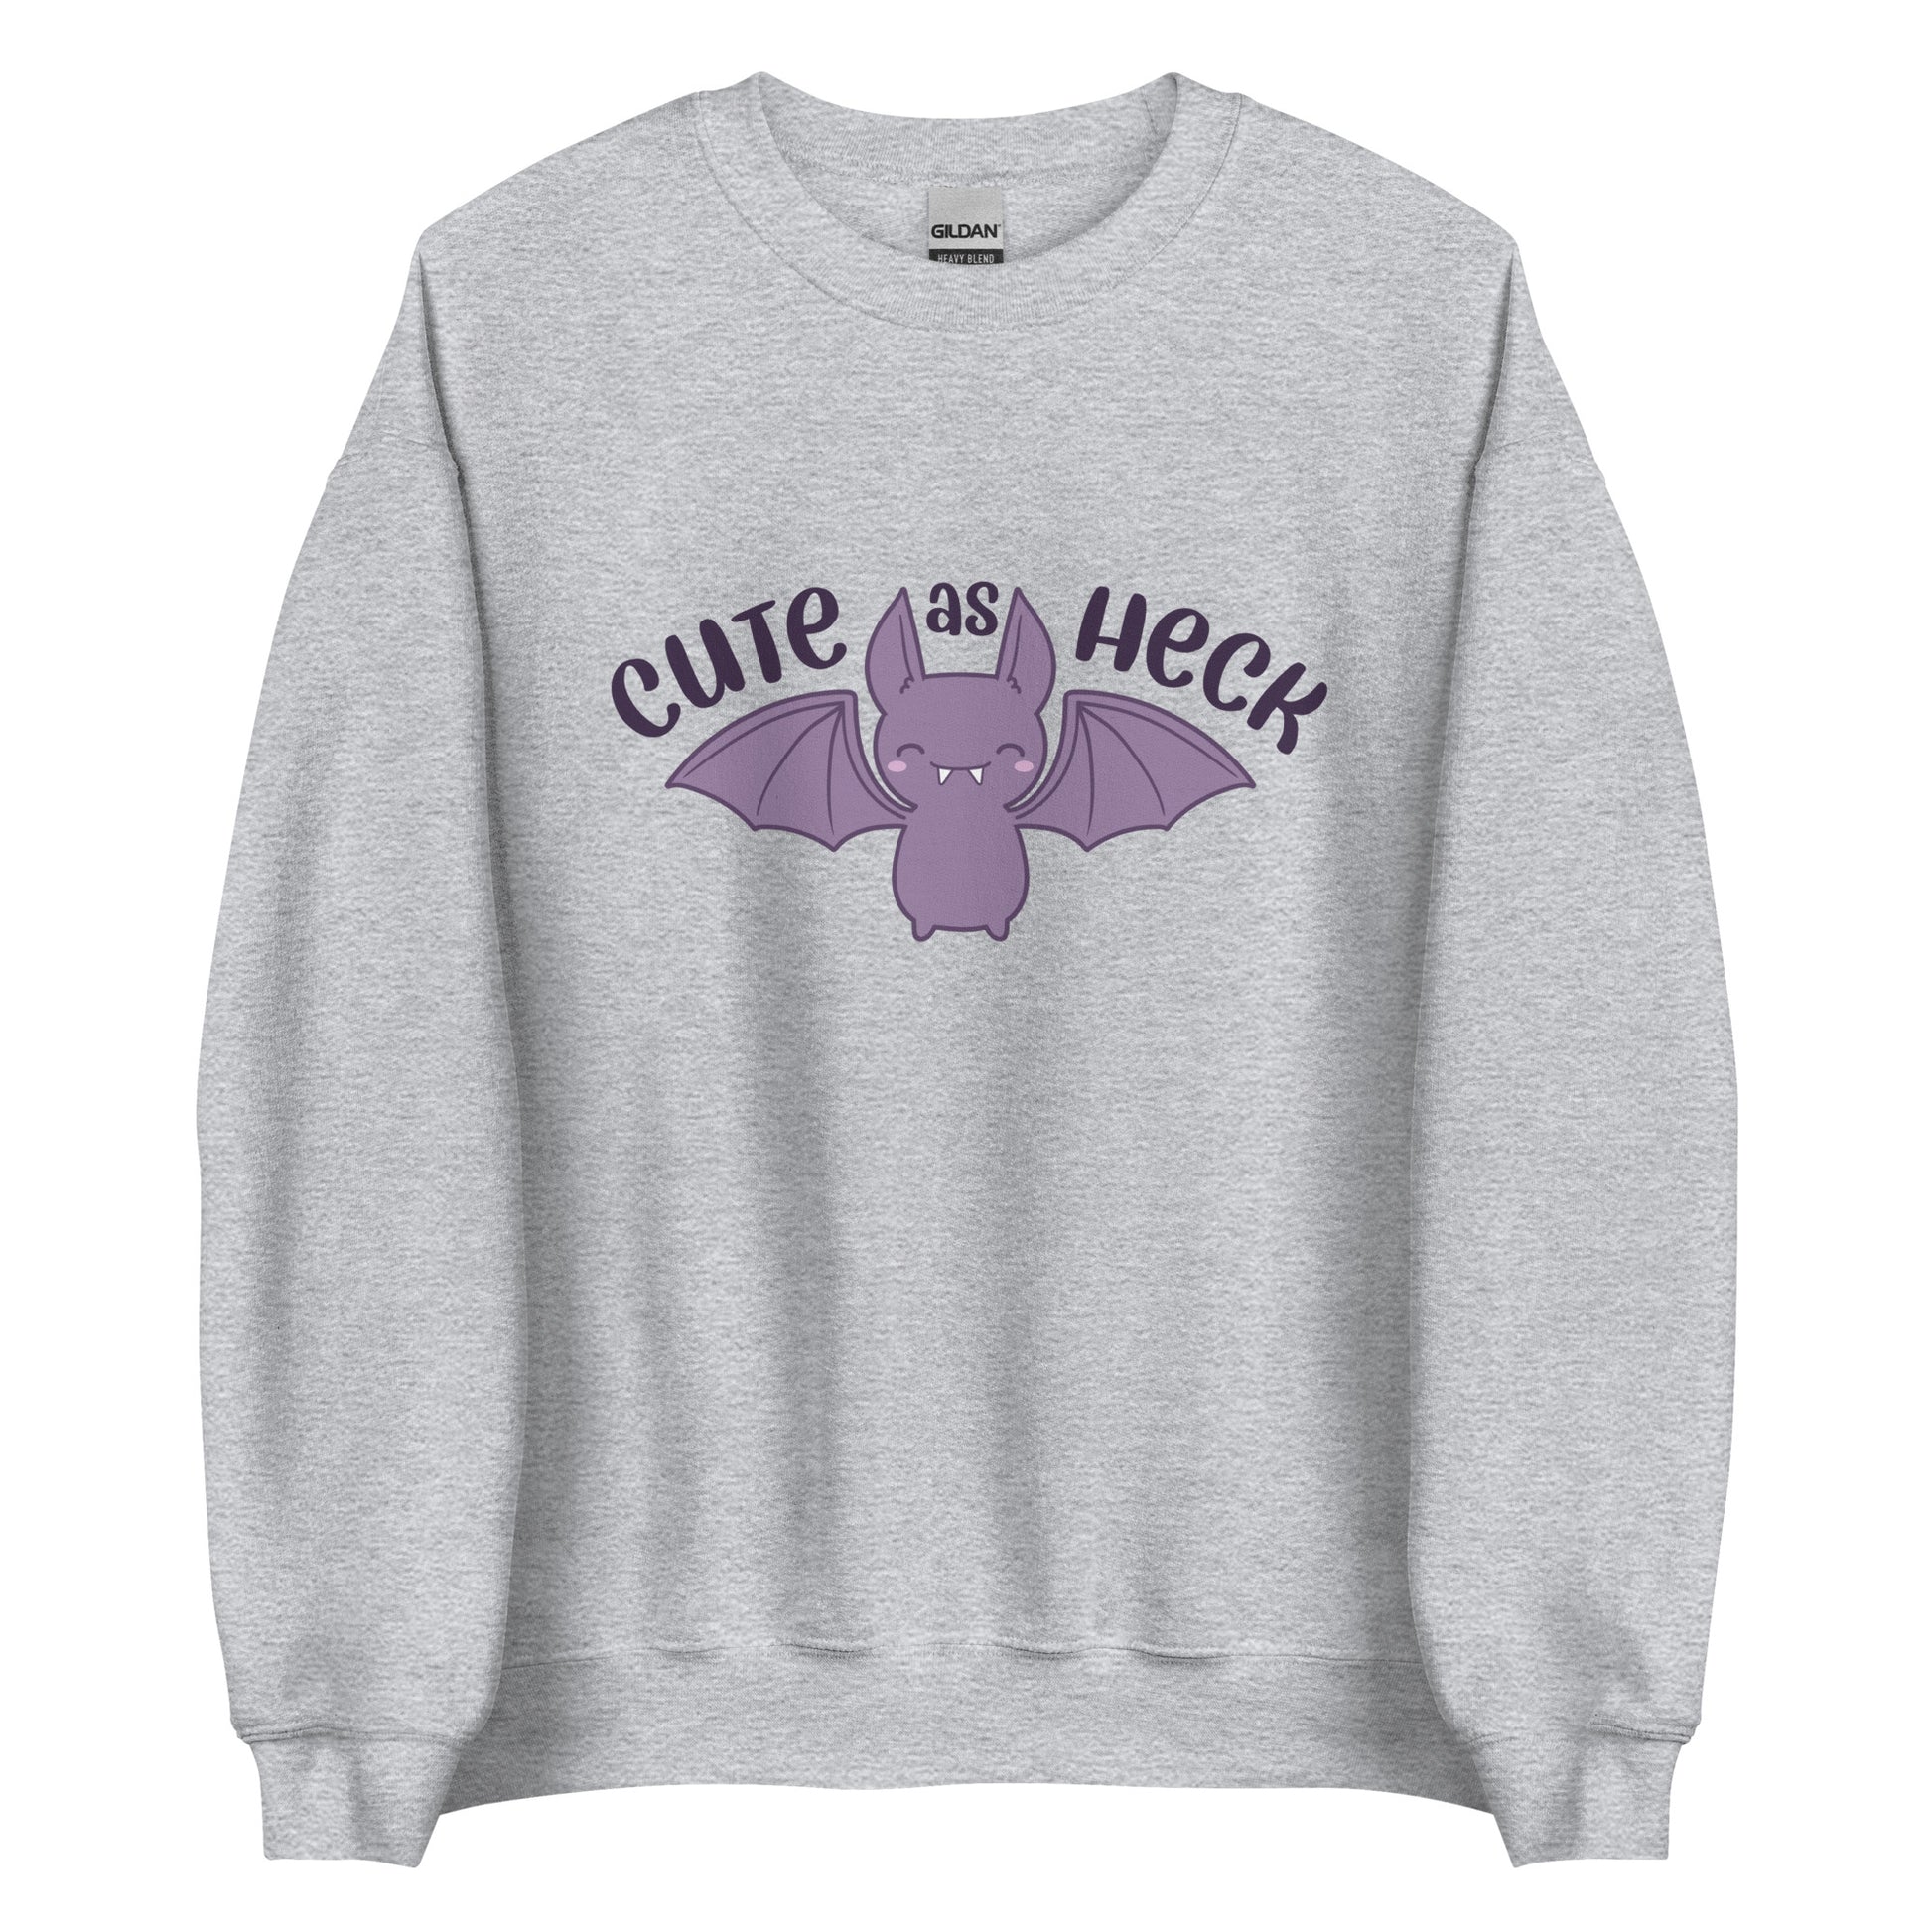 A grey crewneck sweatshirt featuring a smiling purple bat and text reading "Cute As Heck"